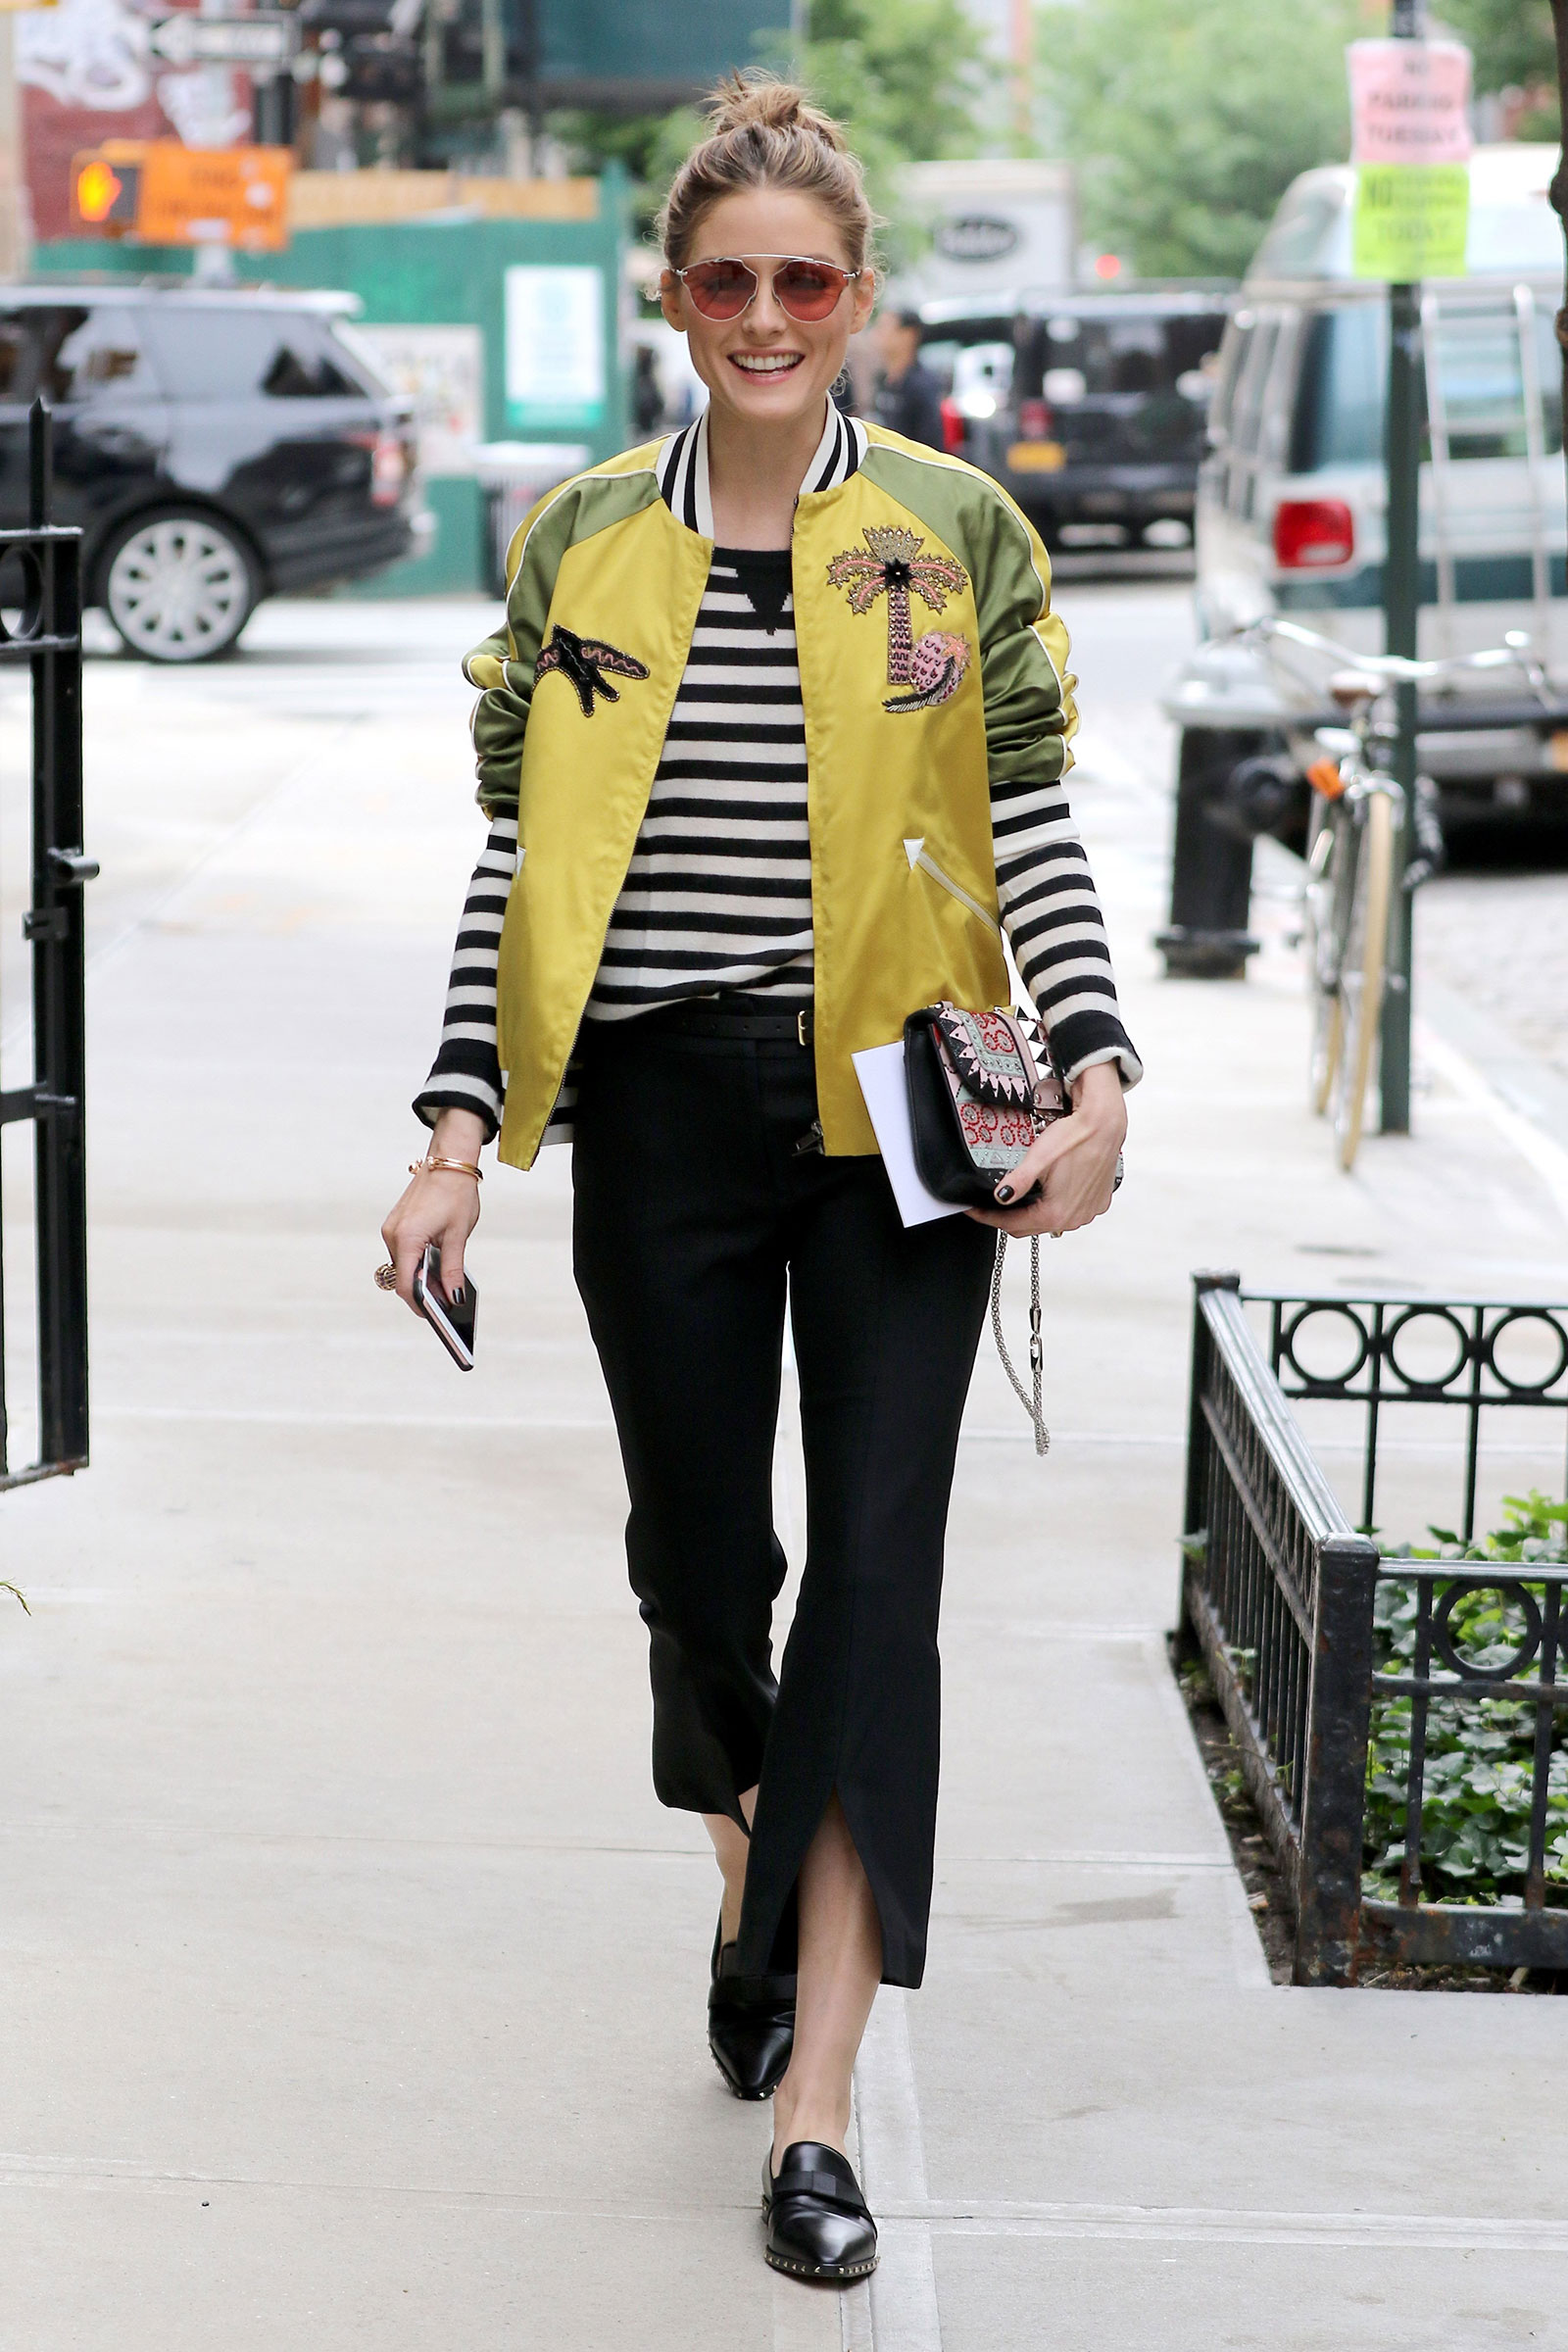 Olivia Palermo wears a yellow satin applique bomber jacket by Valentino with flare cuff pants.